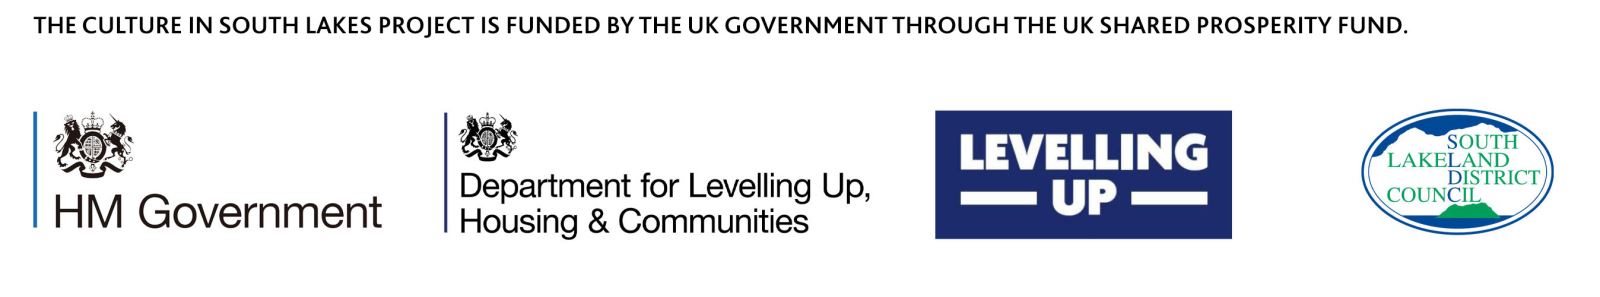 The Culture in South Lakes project is funded by the UK Government through the UK Shared Prosperity Fund.